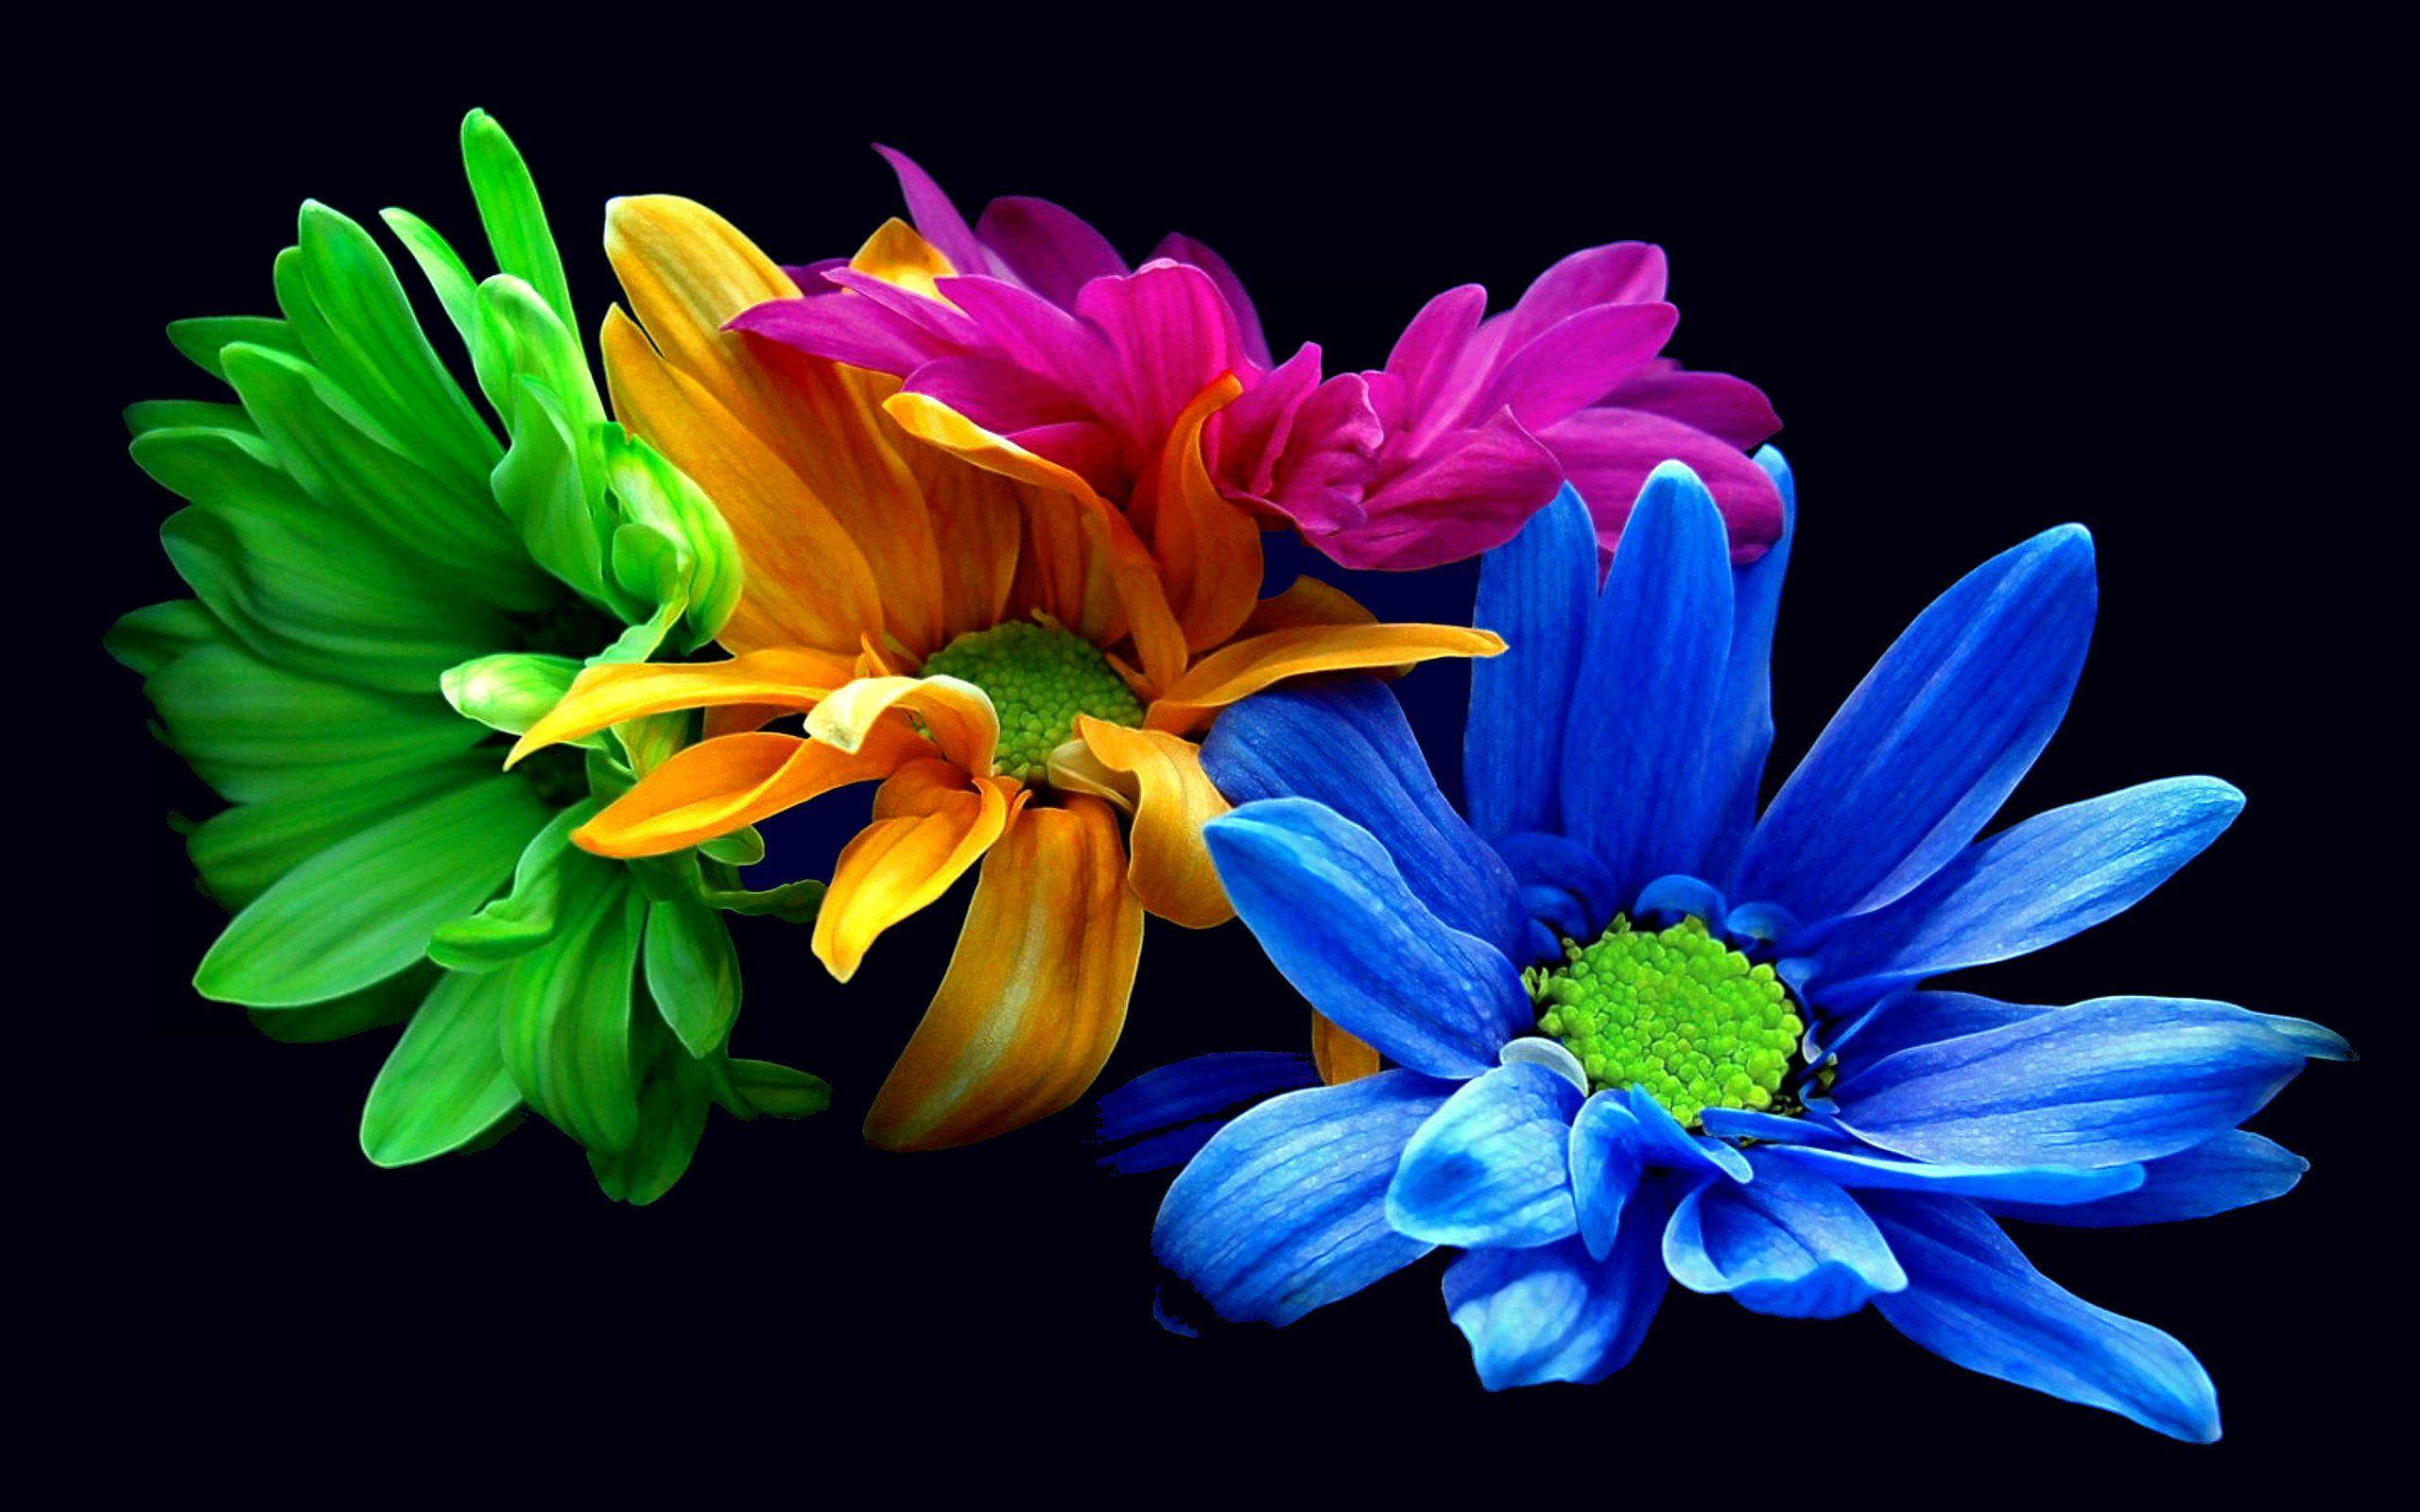 Colorful Flowers Dark Wallpaper, 44 Colorful Flowers Dark Android